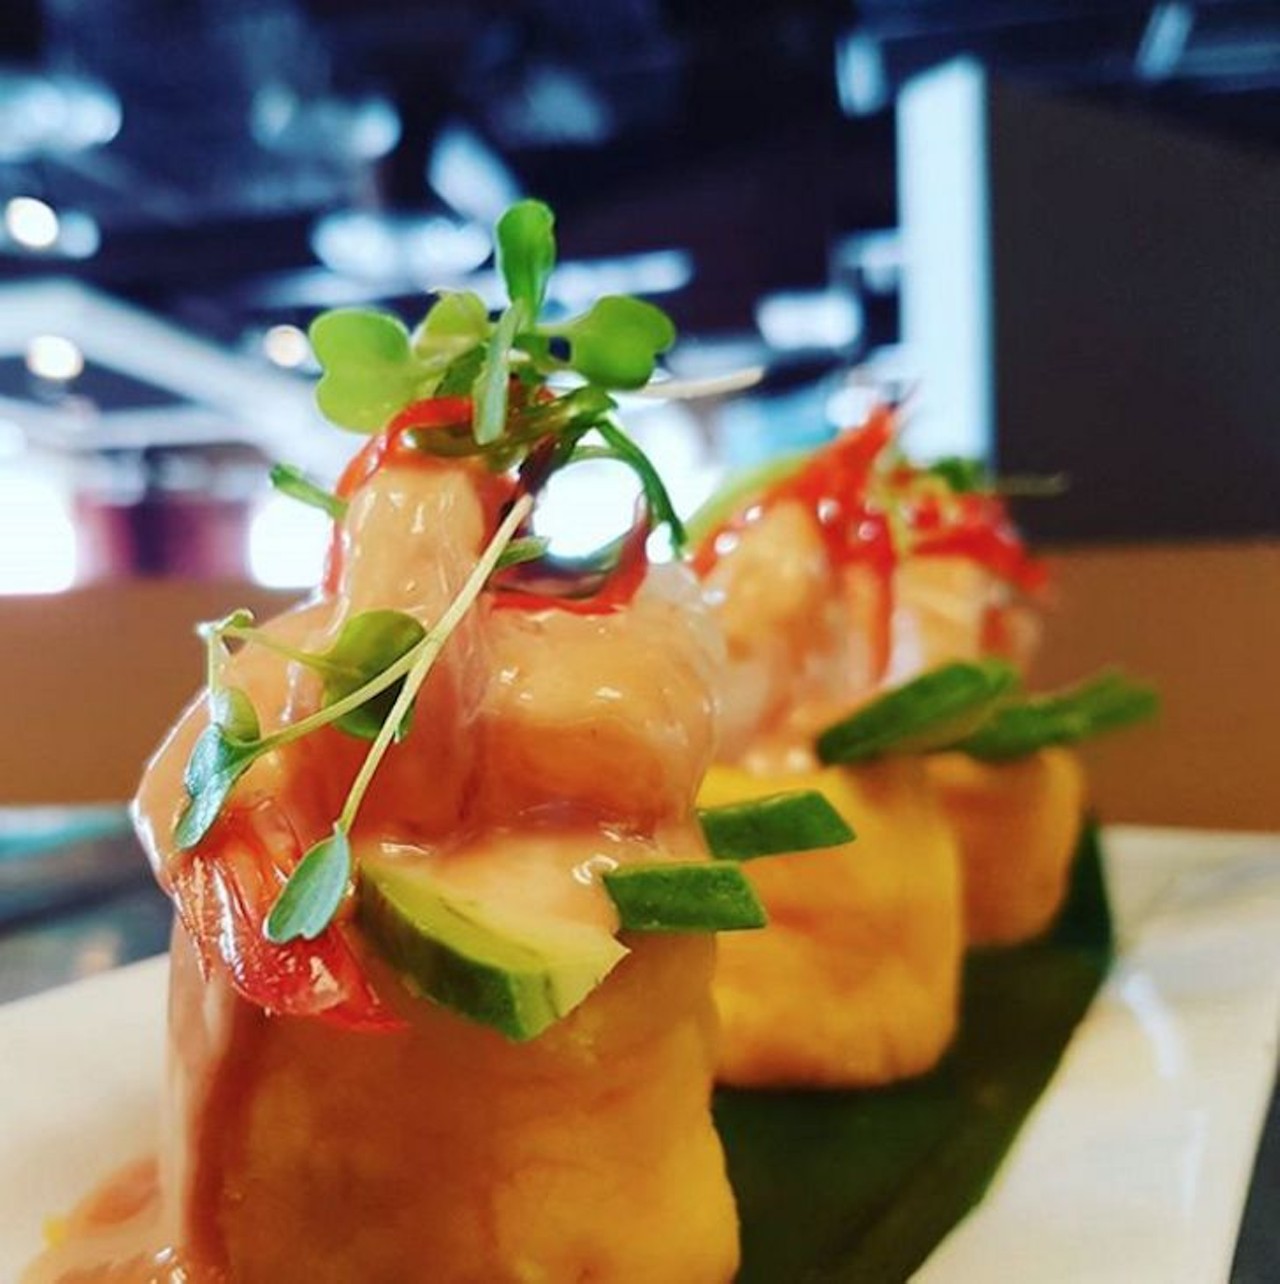 Must  try: The Shrimp Causa Mo-Chica is a light, unique Peruvian starter, complete with mashed potato terrine, juicy shrimp and tasty Golf sauce.
Photo via edinson25/Instagram